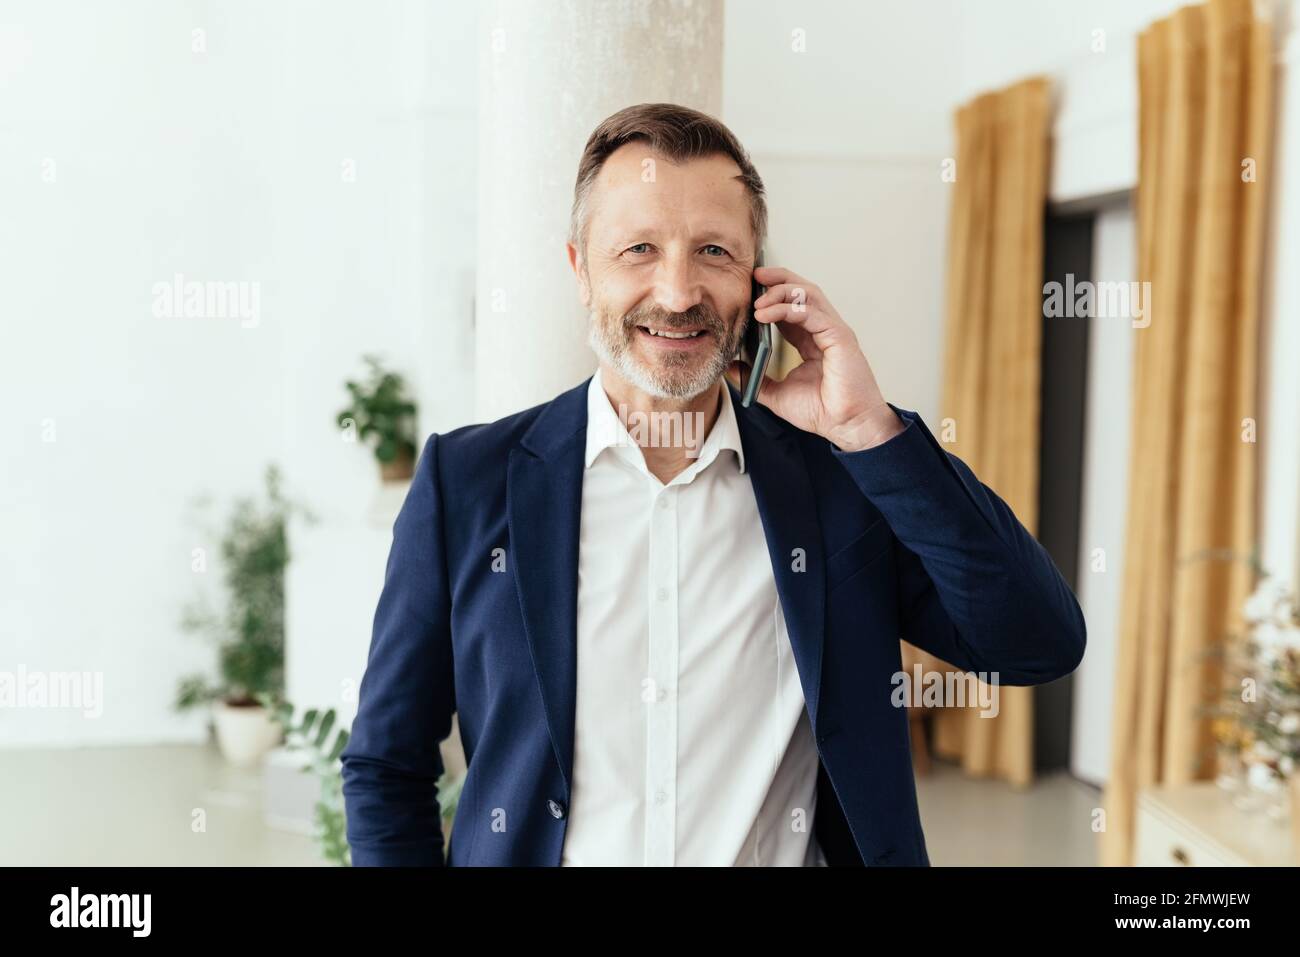 Smart middle-aged businessman chatting on his mobile phone listening to the call with a quiet thoughtful smile in a close up indoor portrait Stock Photo